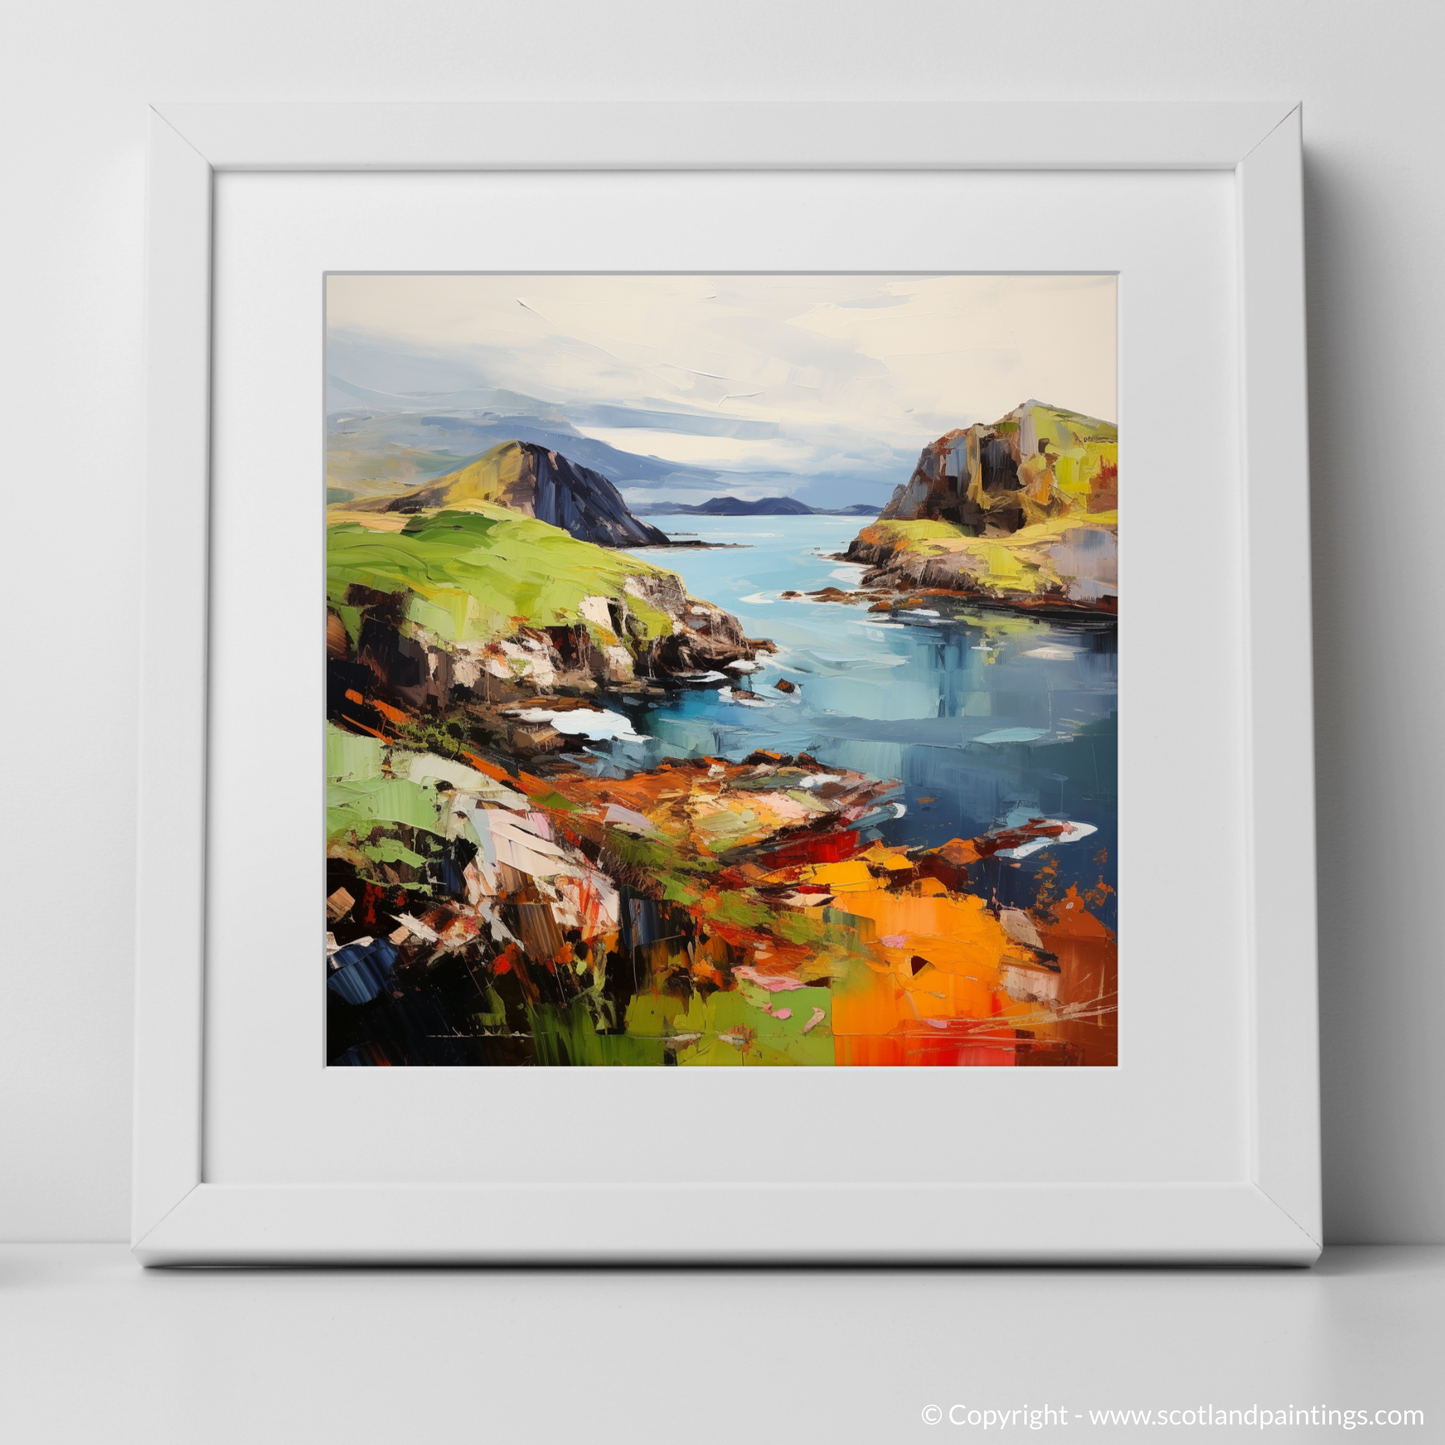 Art Print of Easdale Sound, Easdale, Argyll and Bute with a white frame